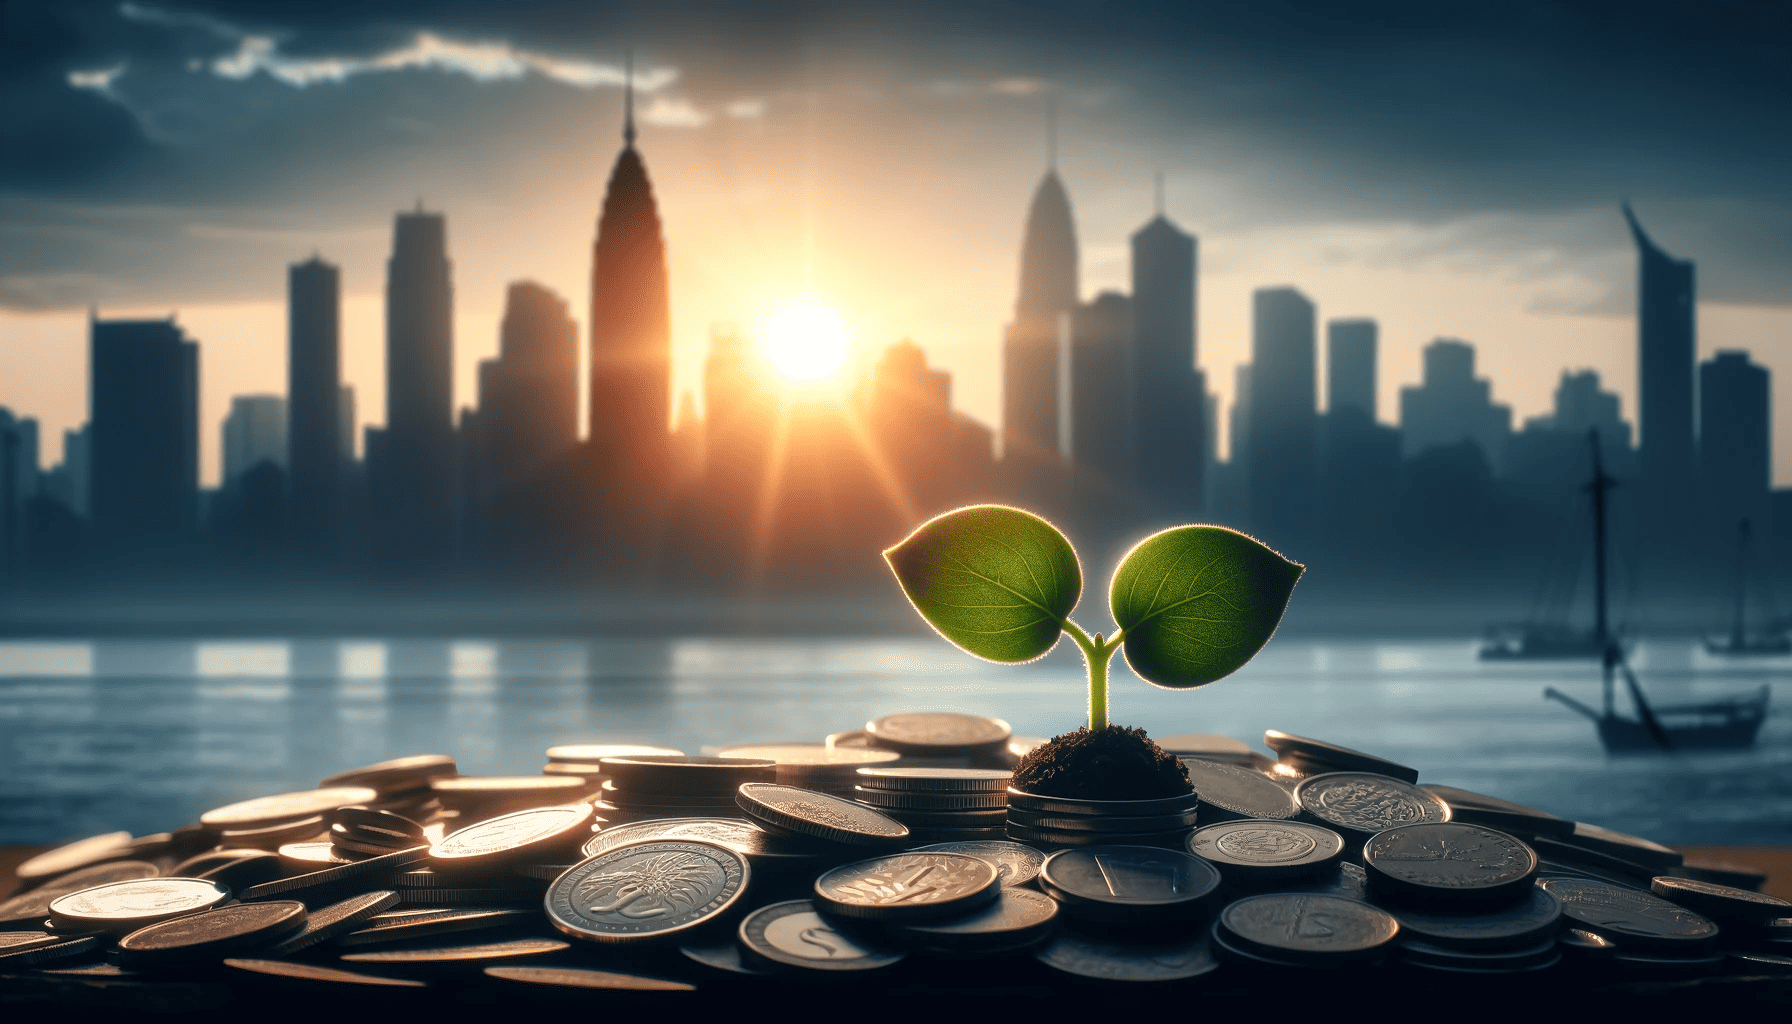 Seed Stage Startups - seedling emerging from a pile of coins, with a silhouette of a city skyline in the background under a rising sun